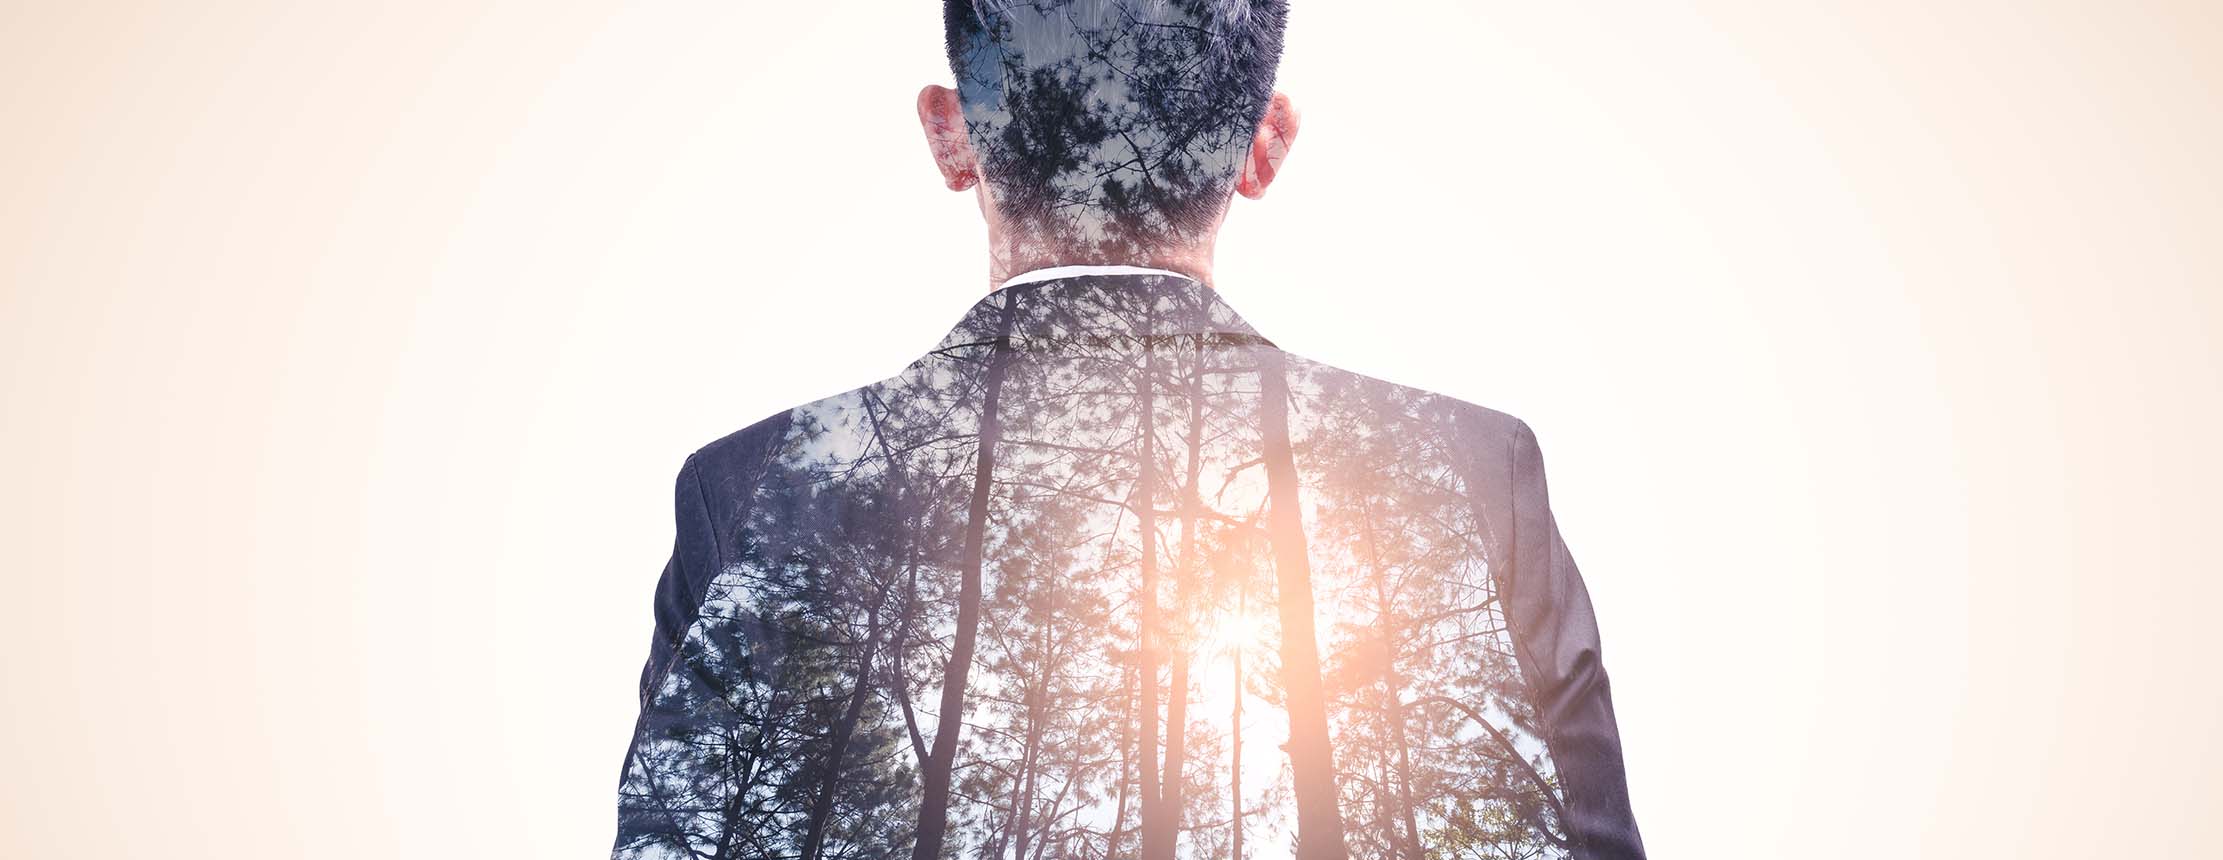 Double exposure image of the businessman standing during sunrise overlay with forest image